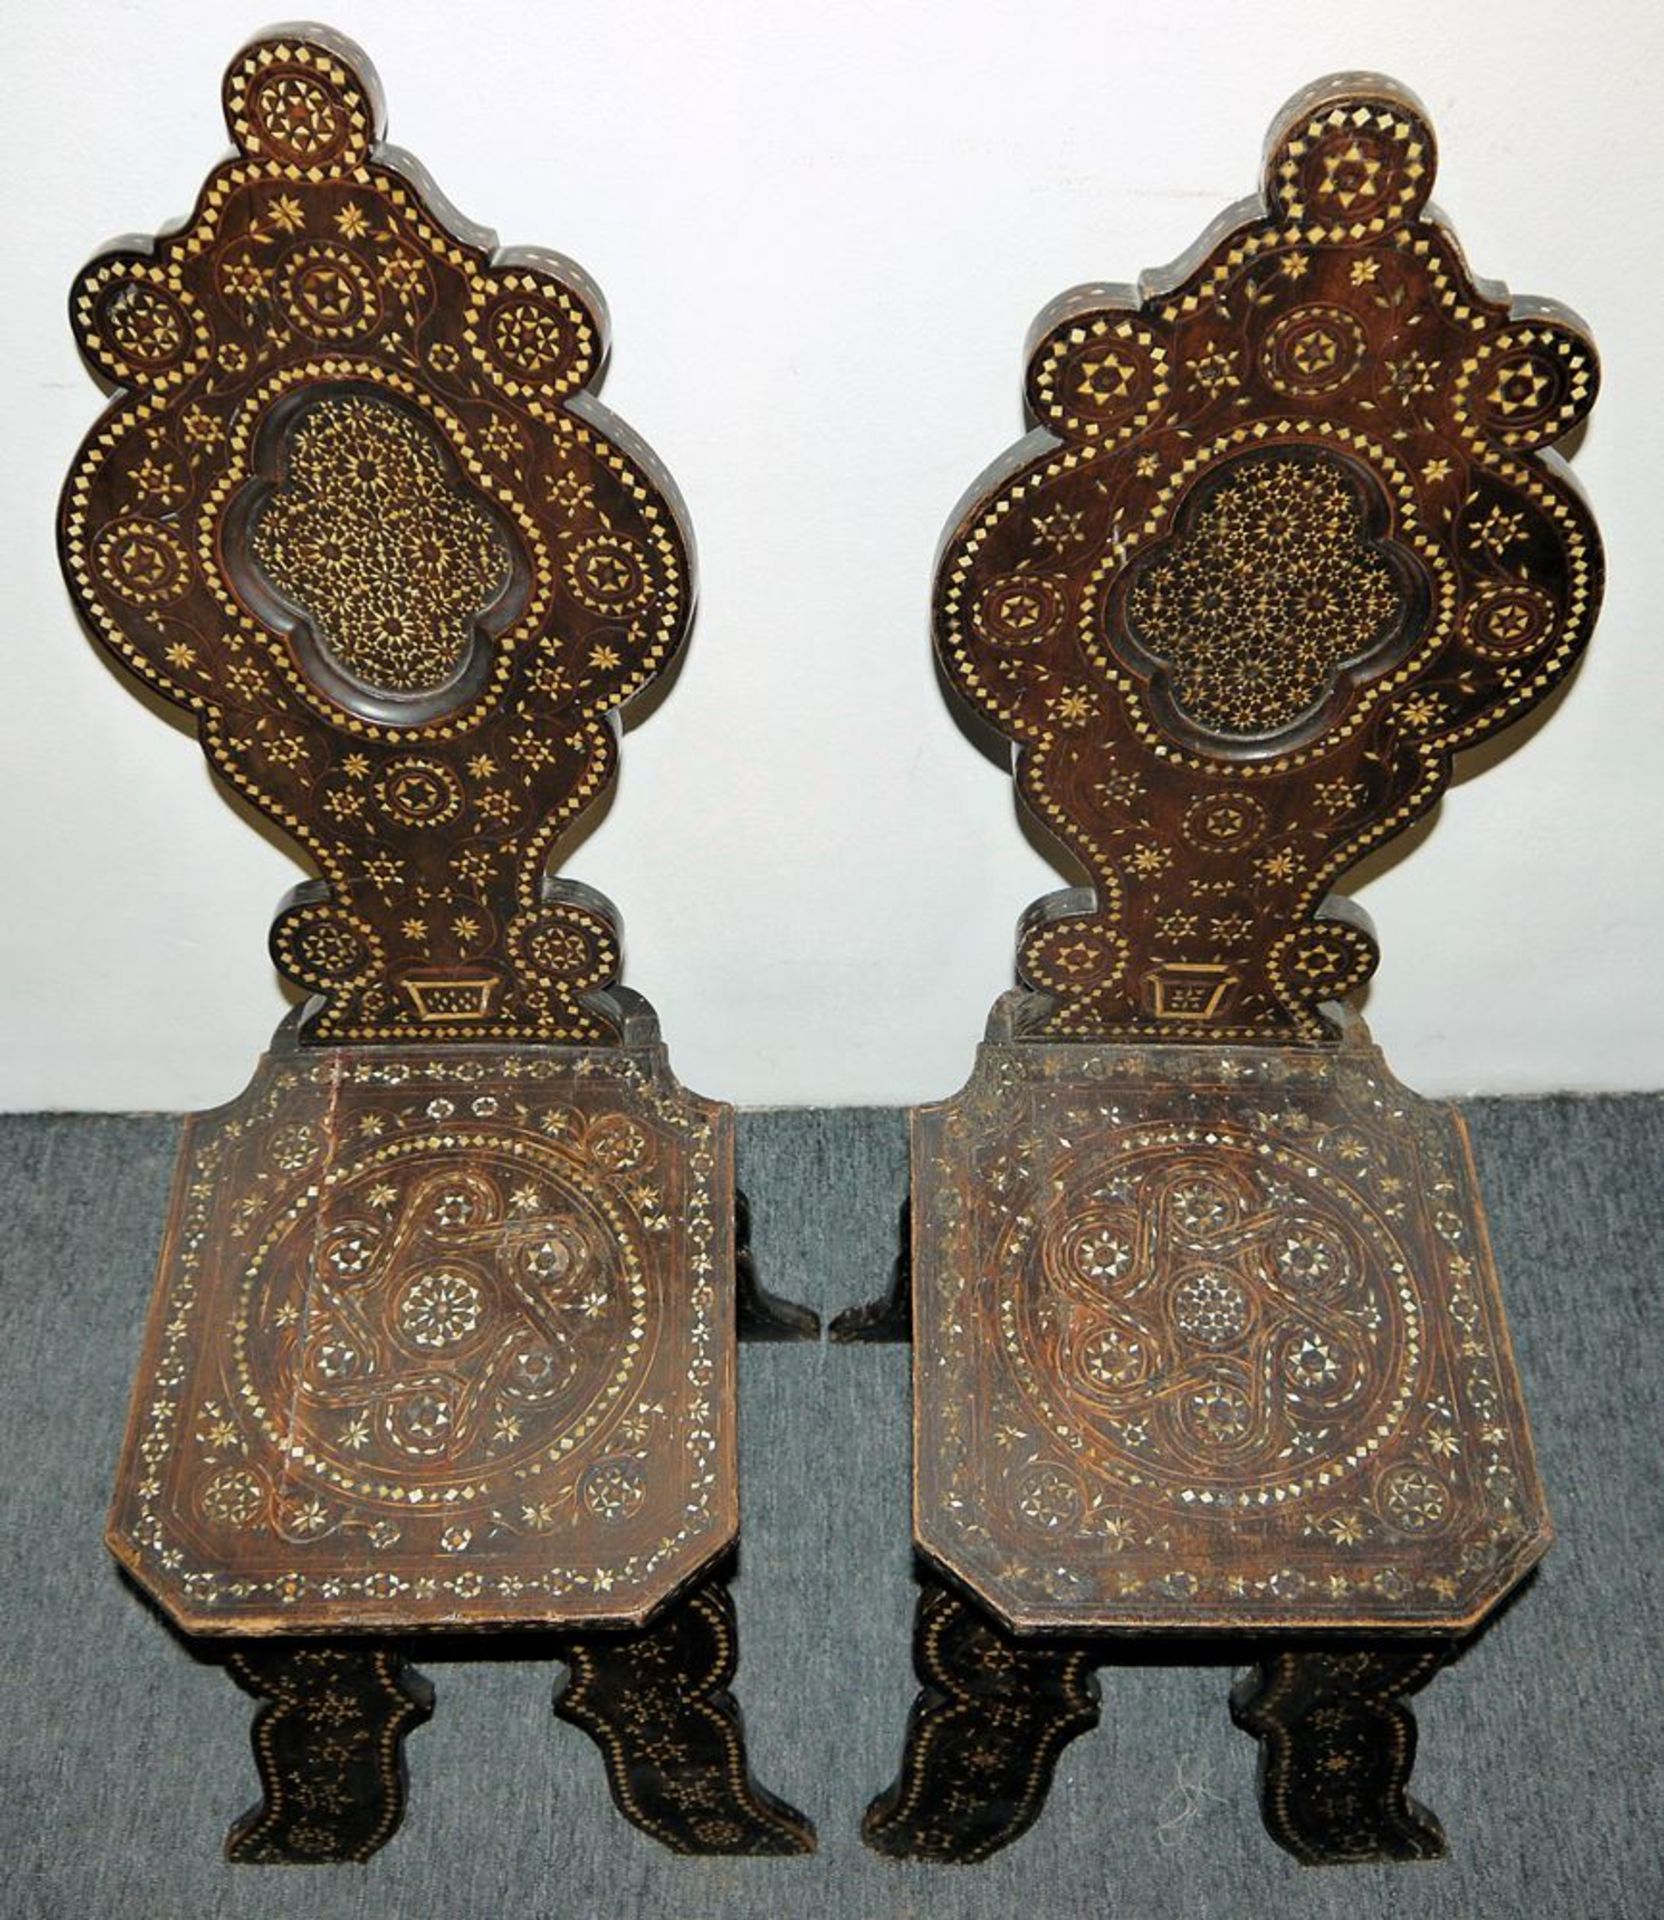 Pair of Sgabello in Moorish style, Italy, end of 19th century - Image 2 of 2